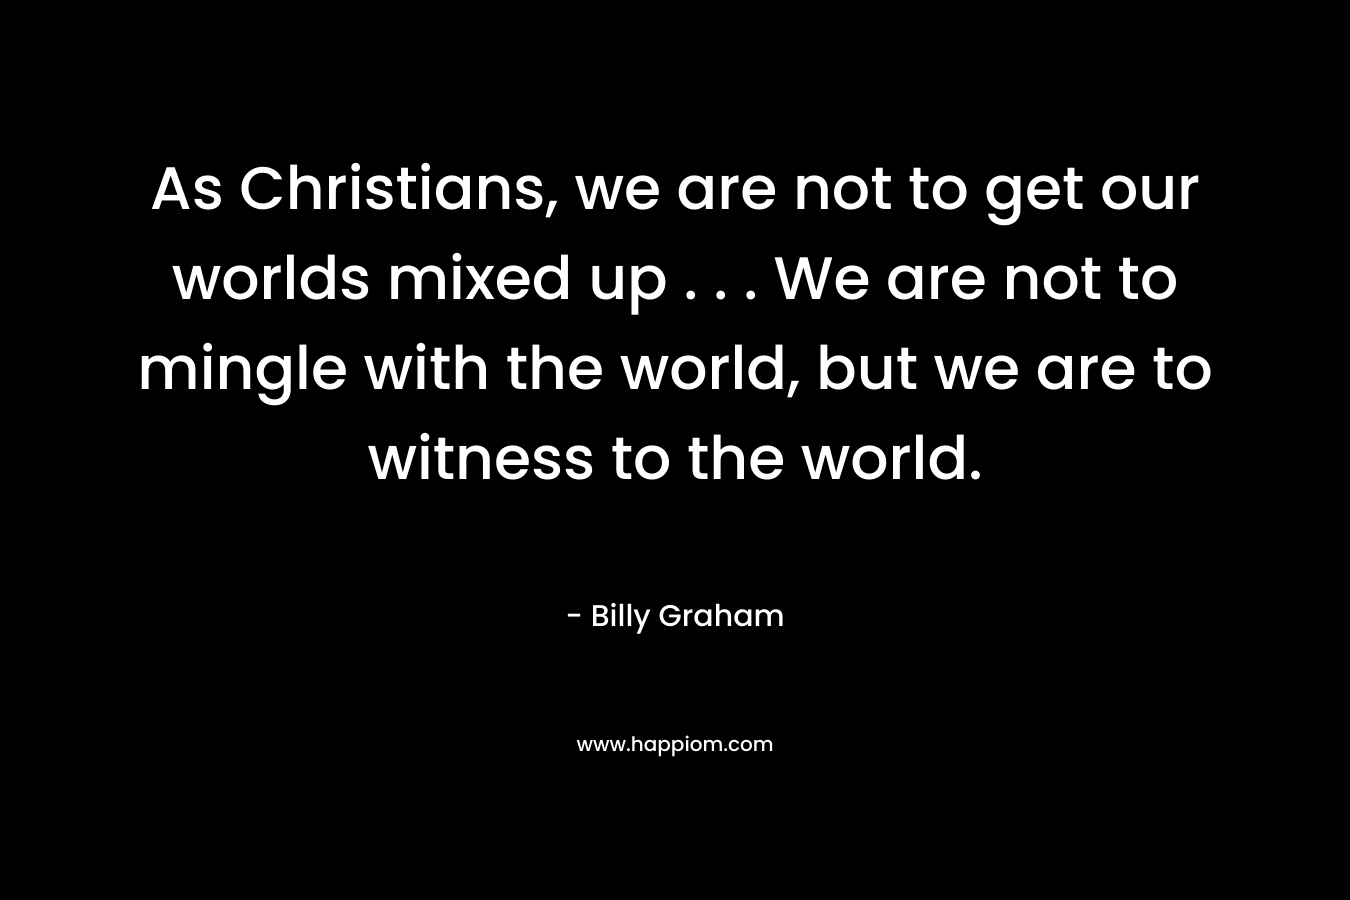 As Christians, we are not to get our worlds mixed up . . . We are not to mingle with the world, but we are to witness to the world. – Billy Graham